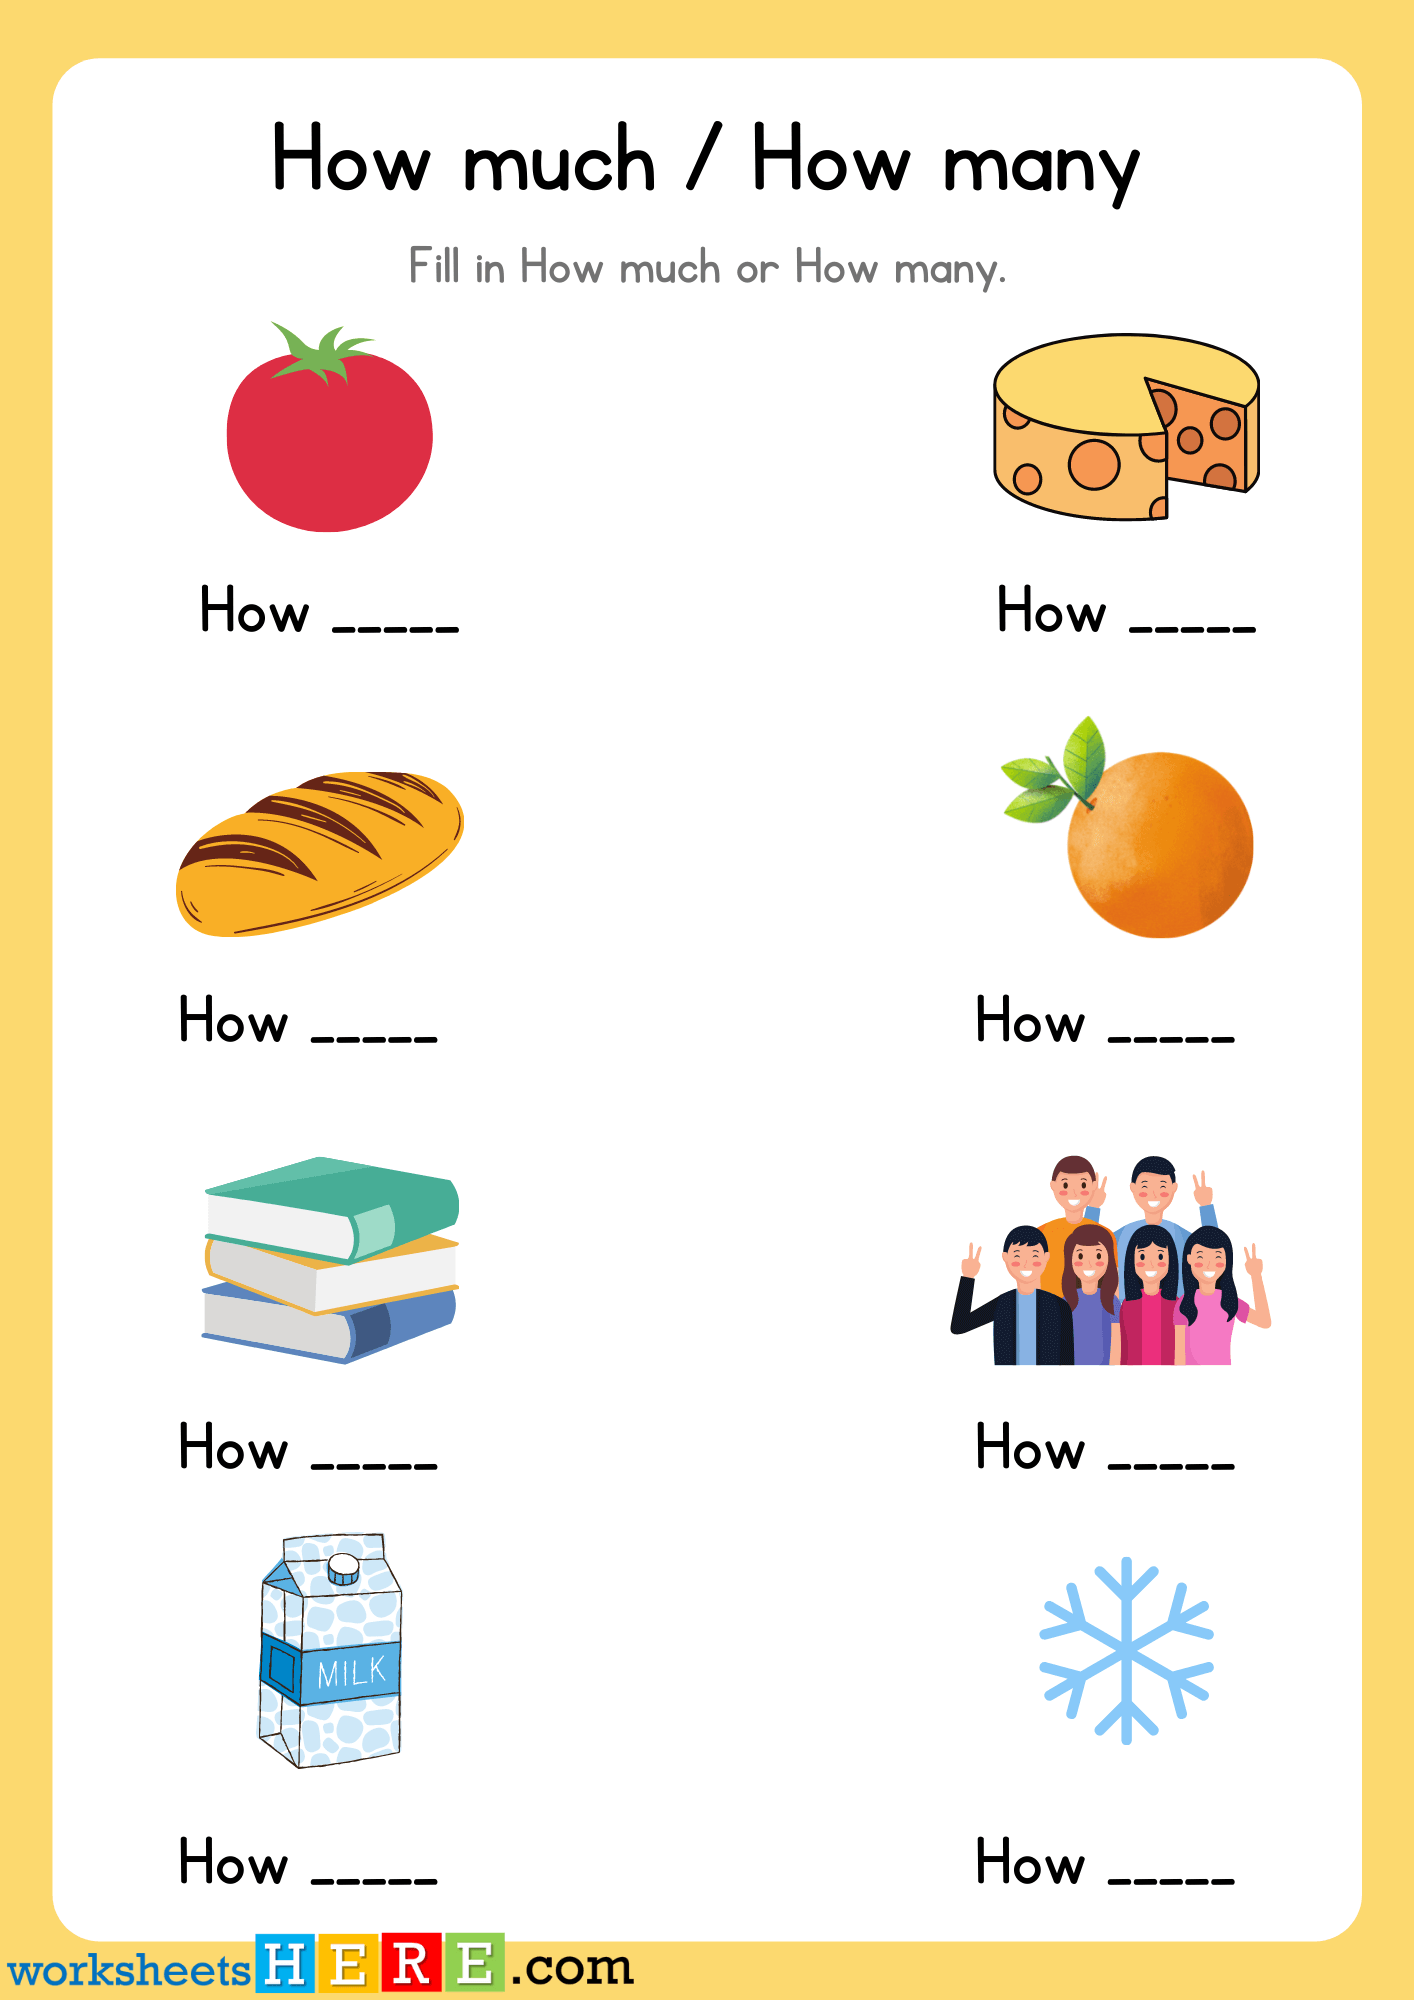 How much or How many Exercises Examples PDF Worksheet For Kids